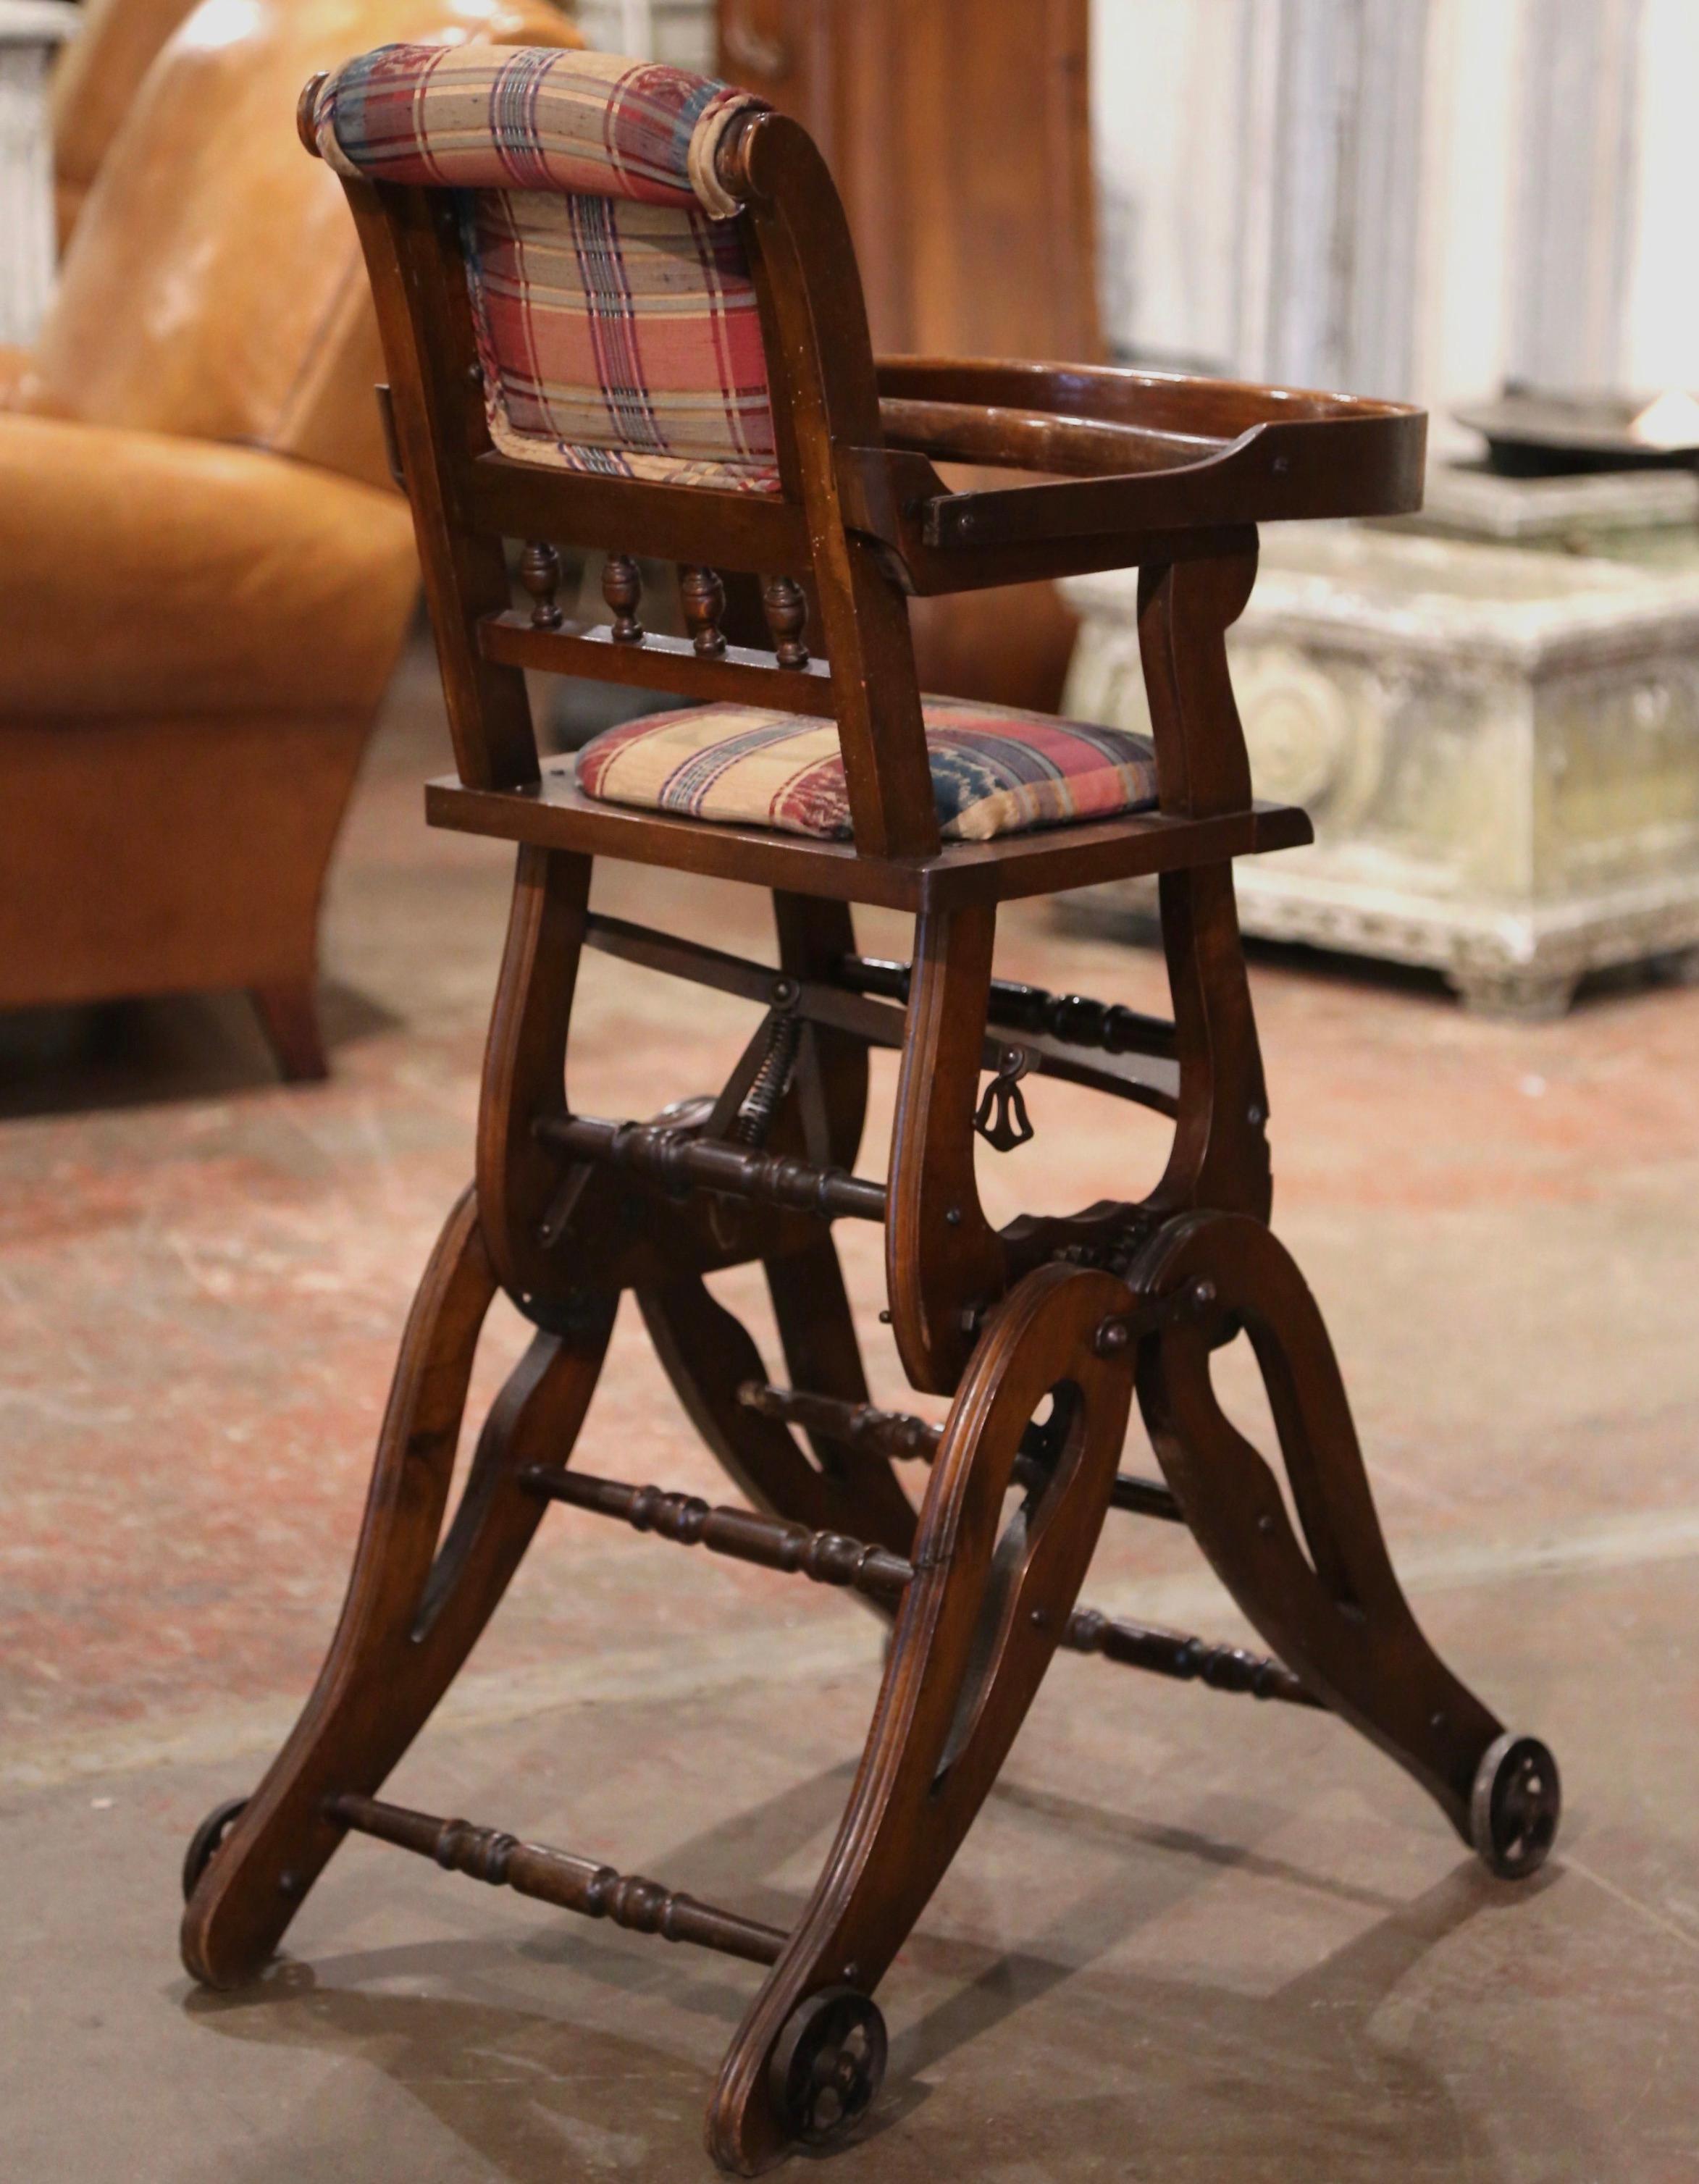 19th Century English Carved Walnut and Fabric Convertible High Chair to Rocker For Sale 2